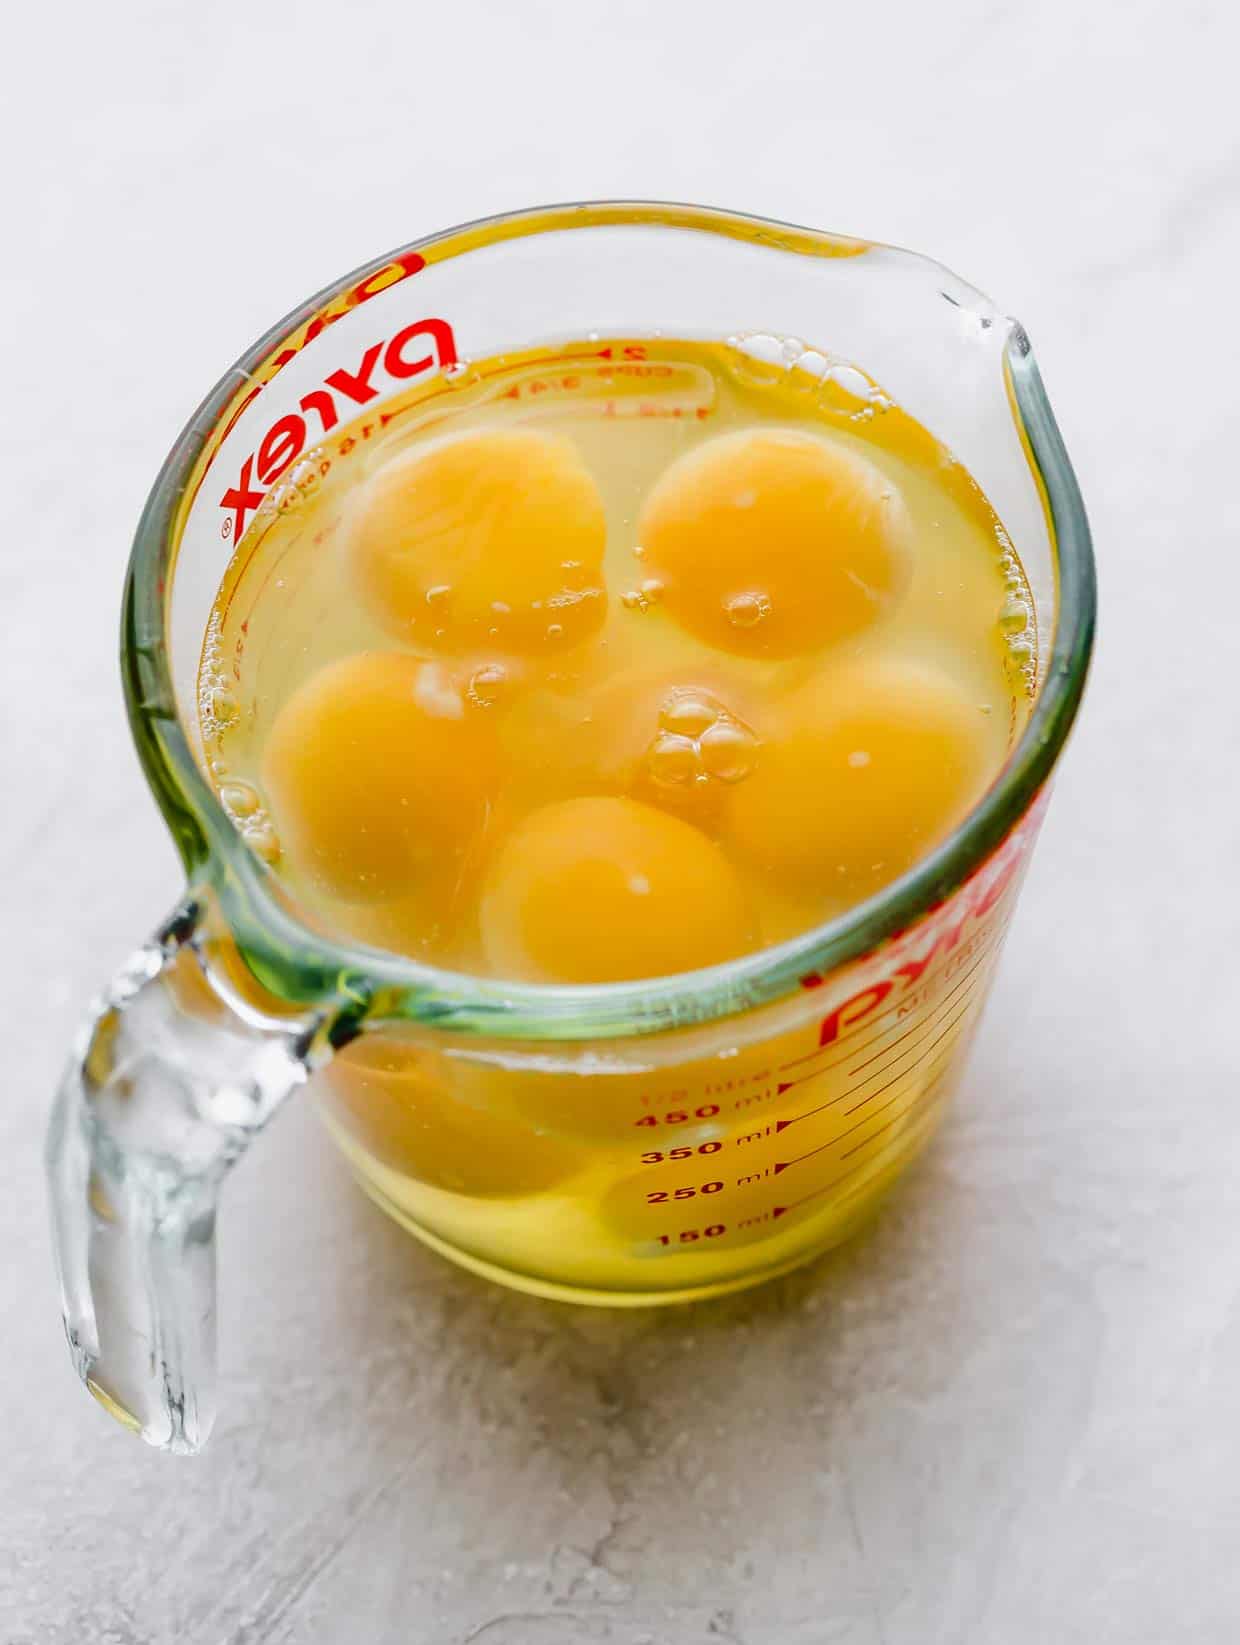 A glass liquid measuring cup with cracked eggs in it.